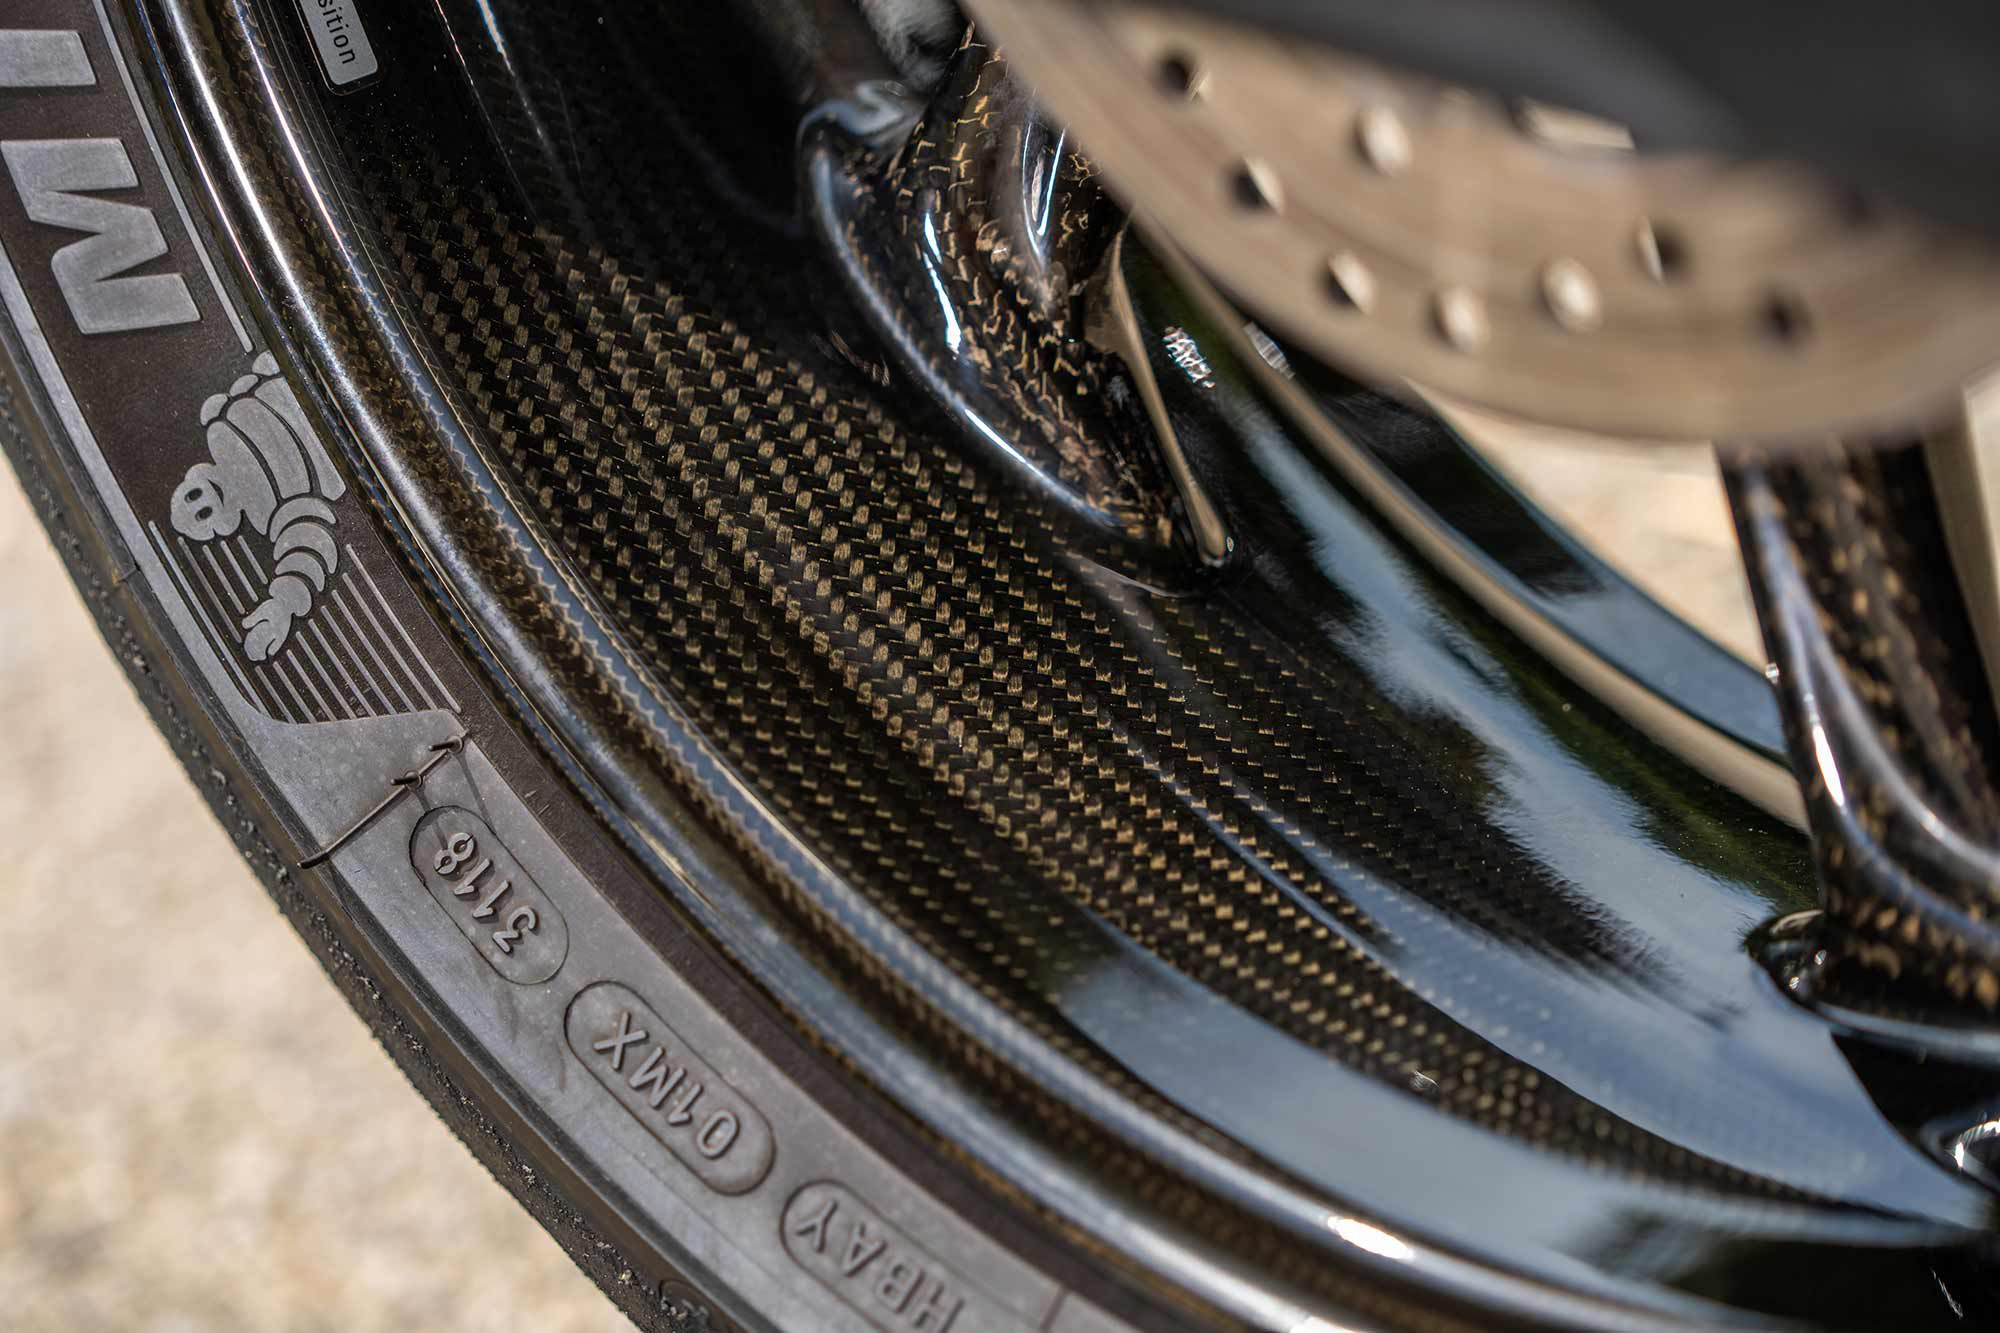 Included in the up-spec $3,750 M package are a set of production carbon fiber wheels.